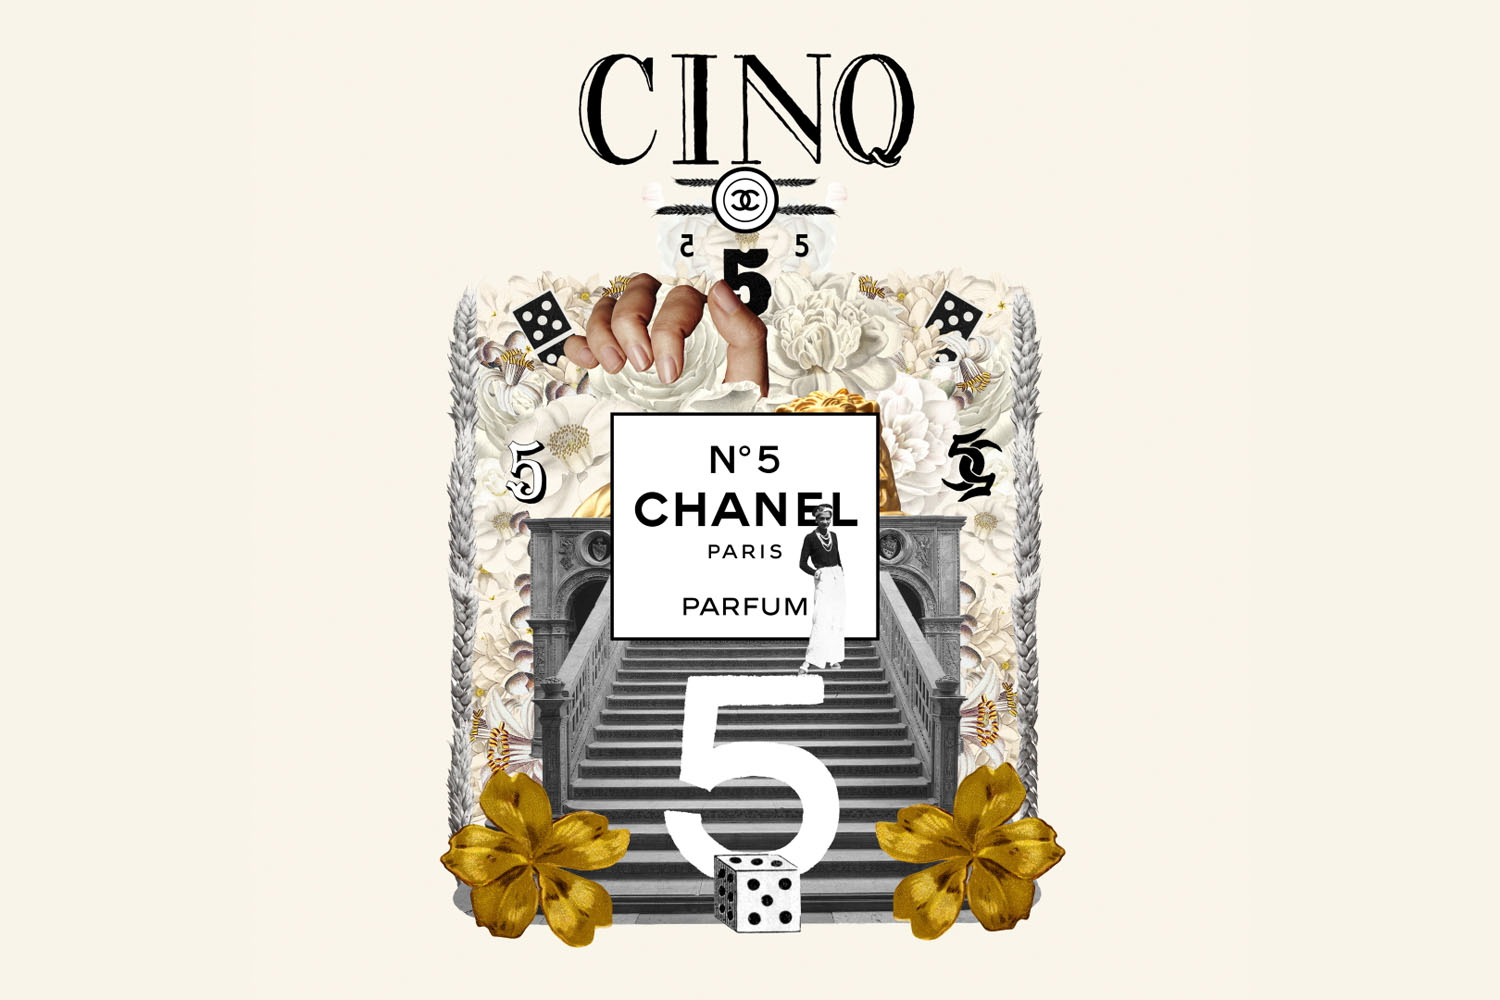 Chanel Celebrates 100 Years of their Iconic No. 5 Fragrance